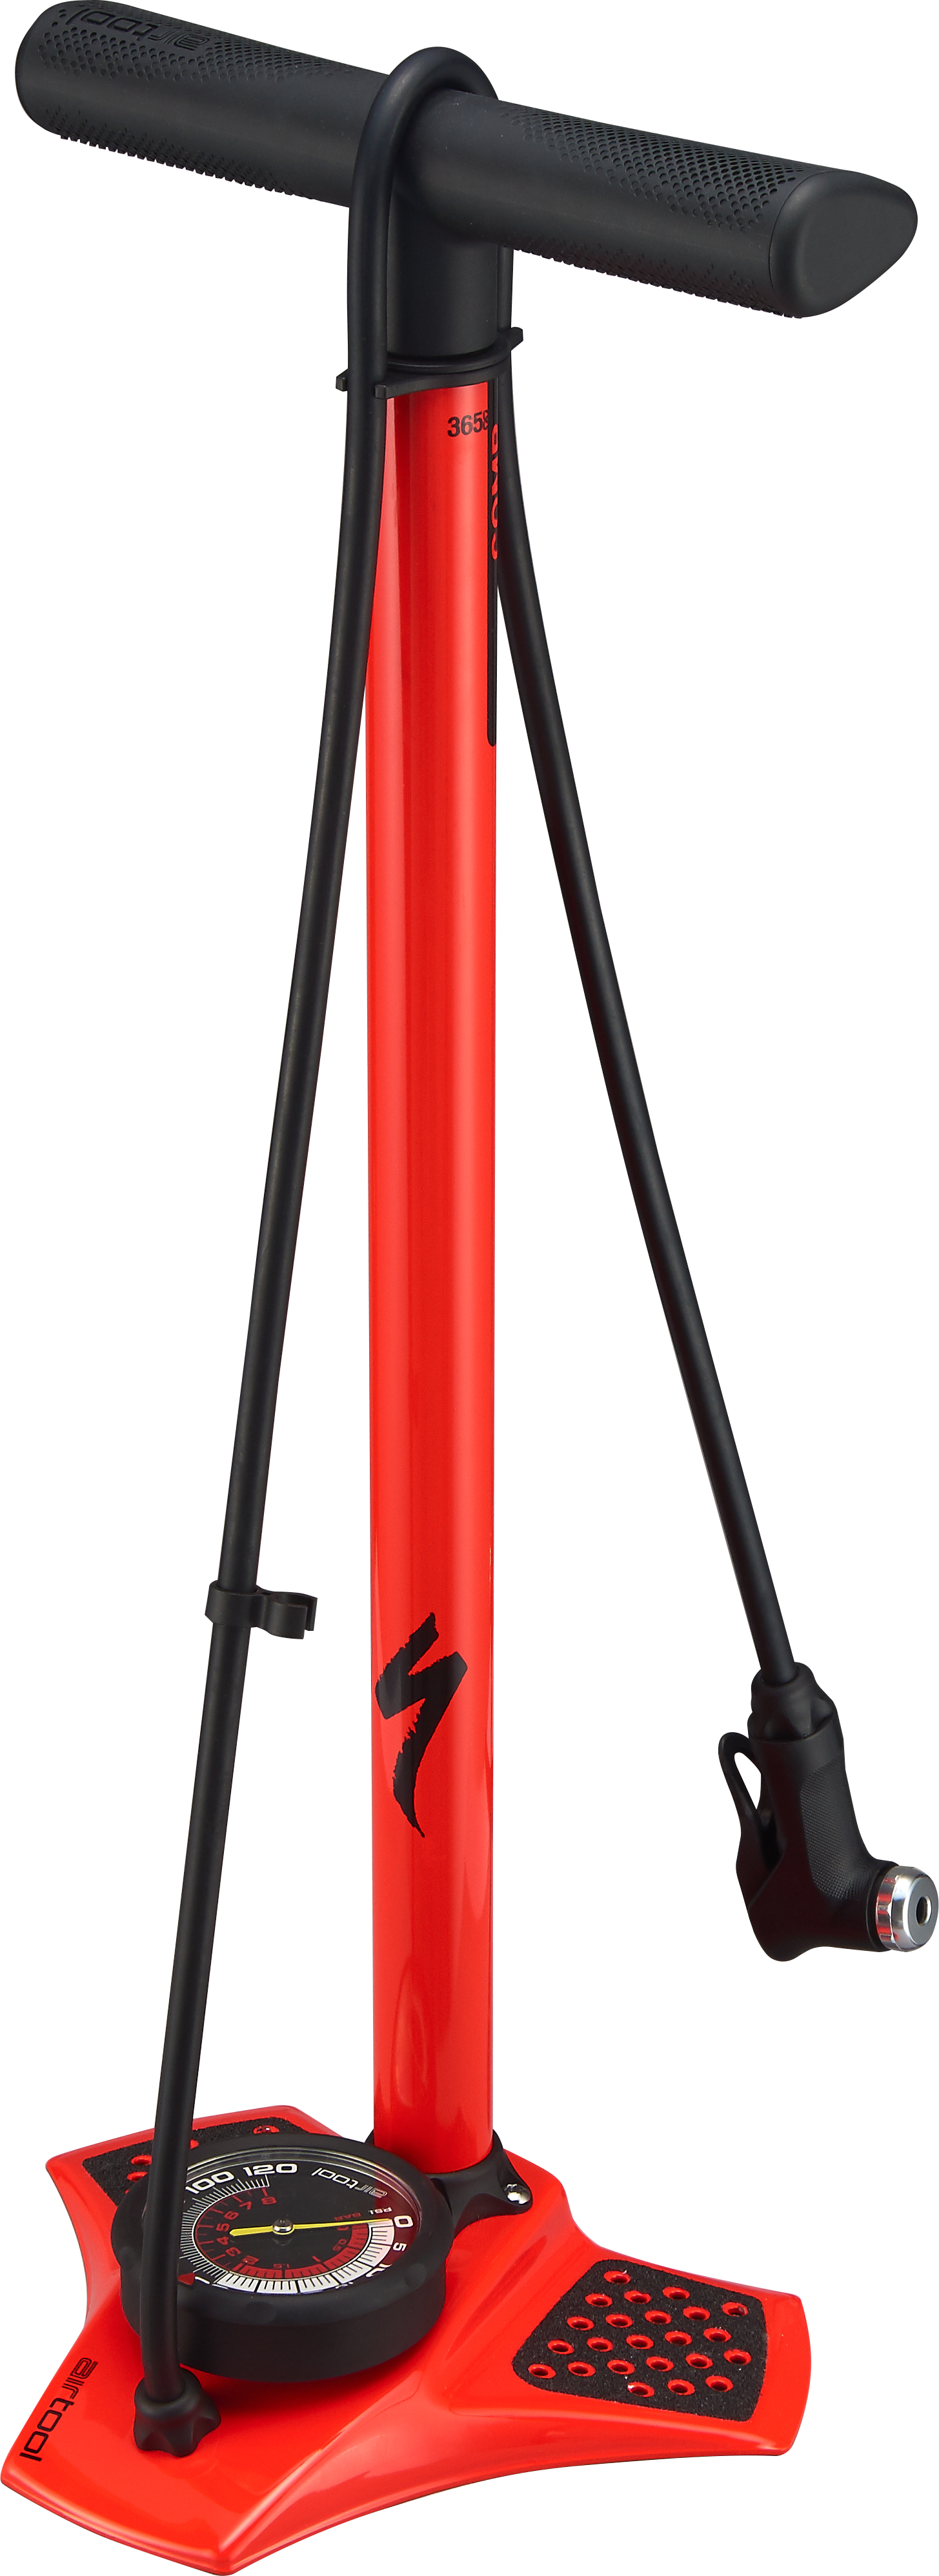 Specialized  Air Tool Comp V2 Track Pump in Red  Rocket Red